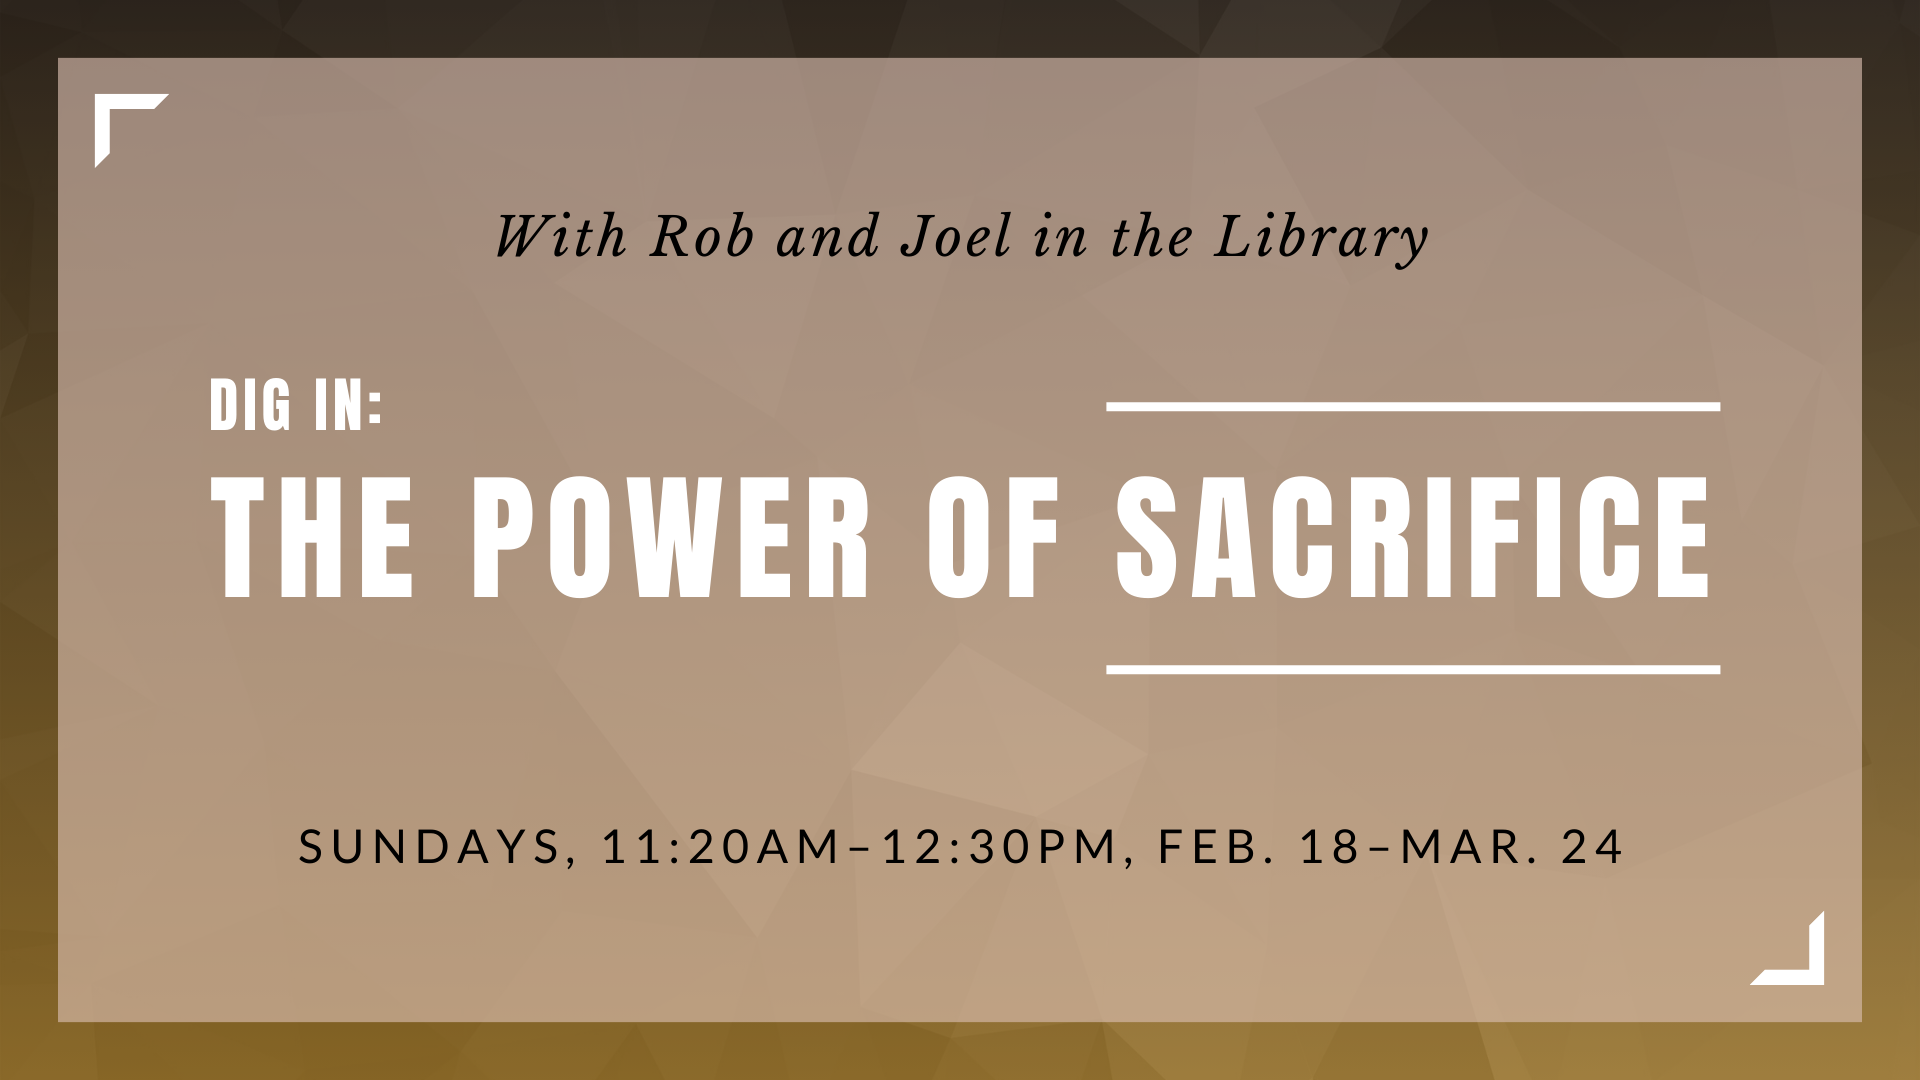 Graphic for church event. The power of sacrifice with Rob and Joel in the library, Sundays, 11:20am-12:30pm, Feb. 17-March 24